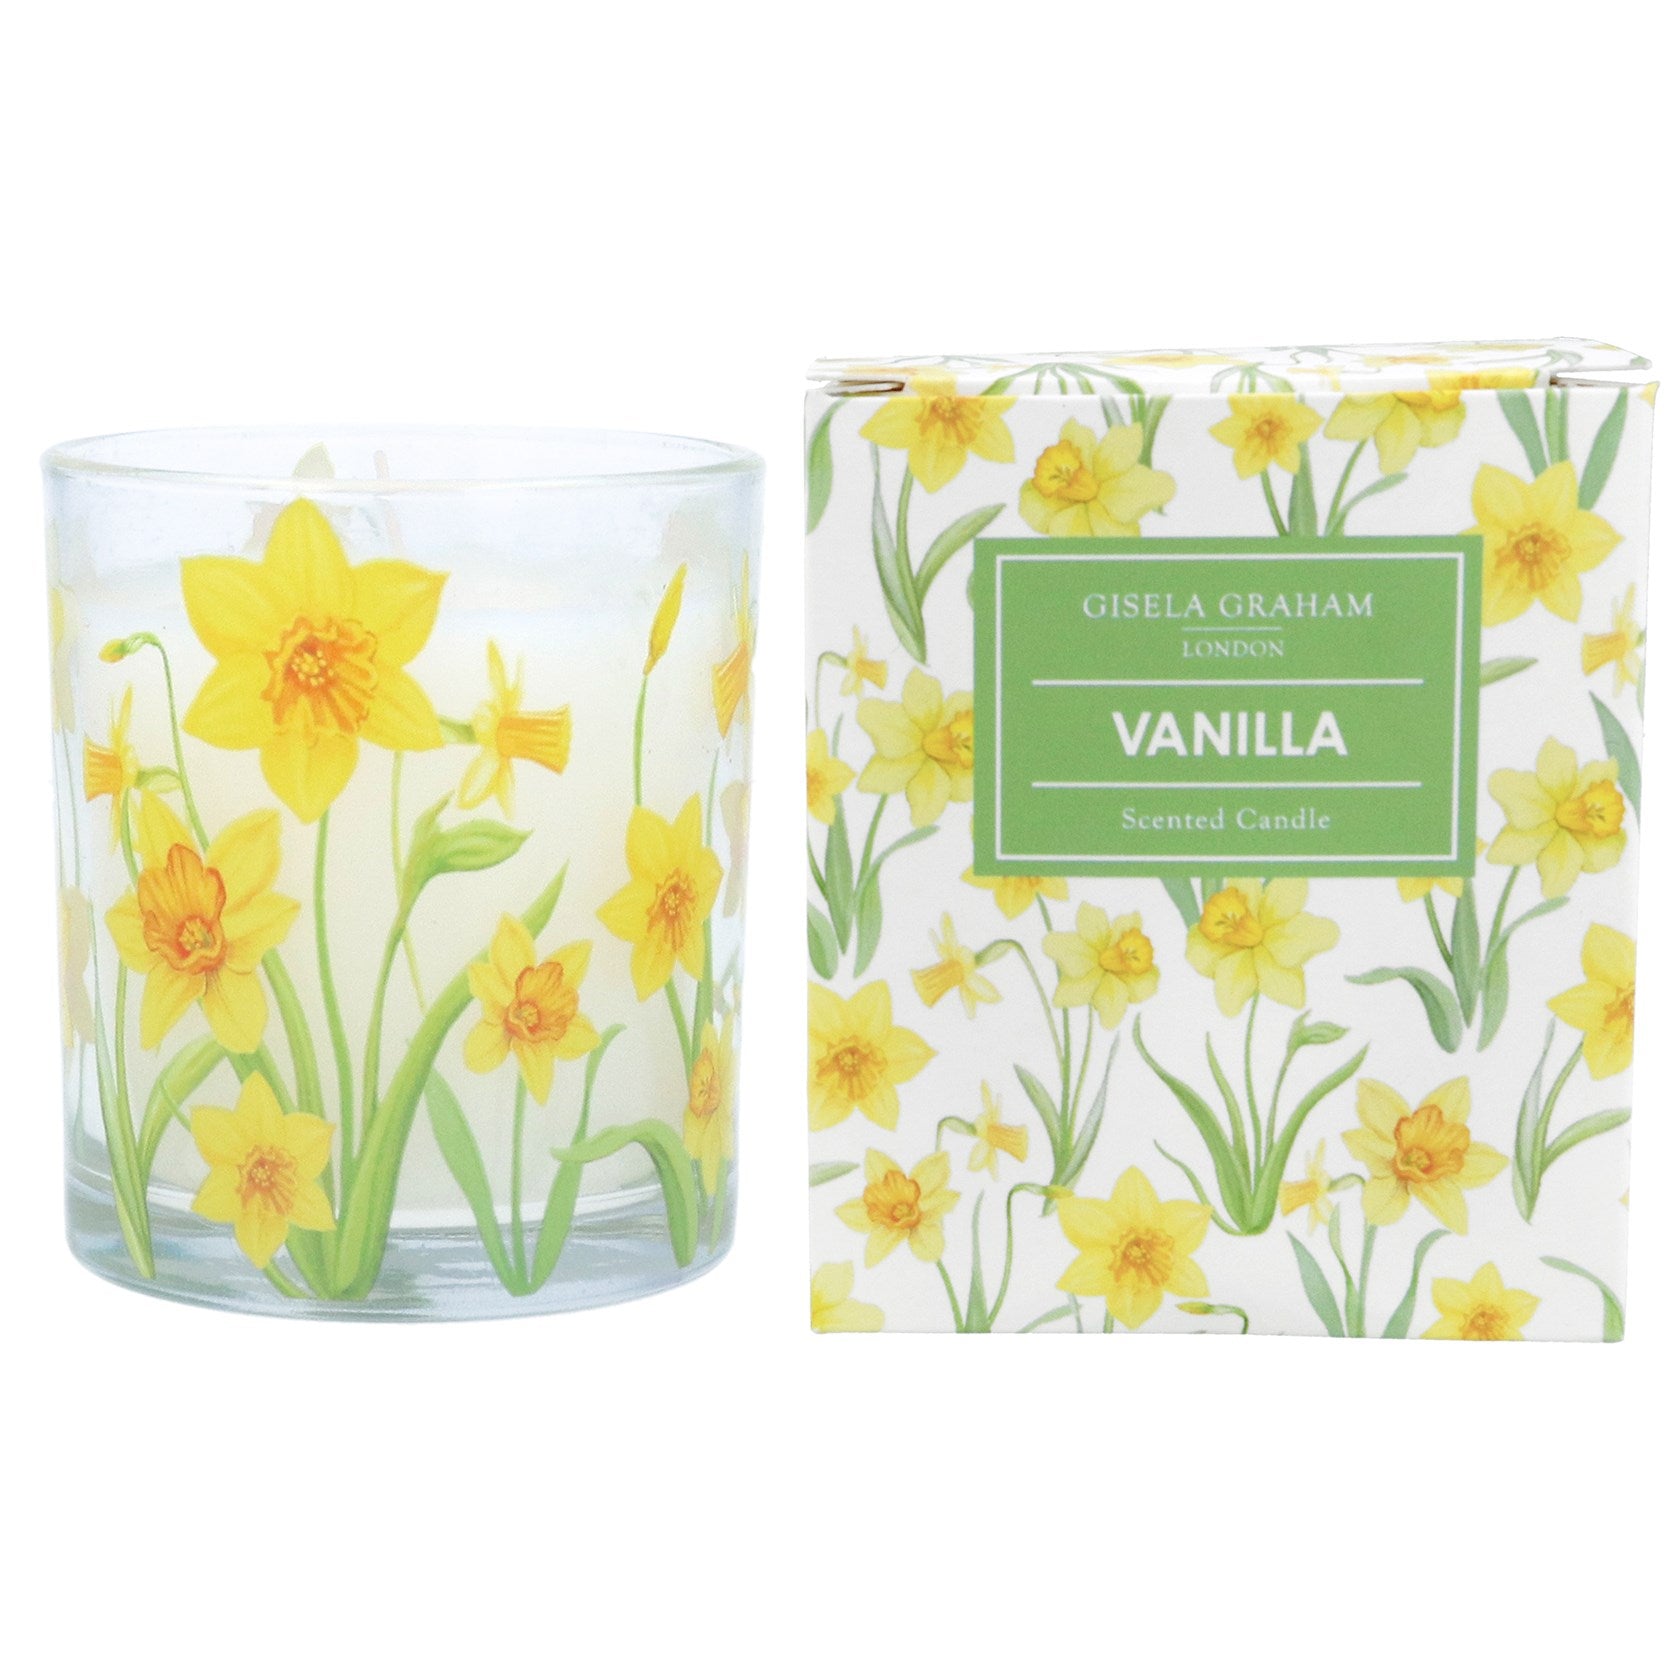 Daffodil Vanilla Scented Candle in Glass Pot - Large